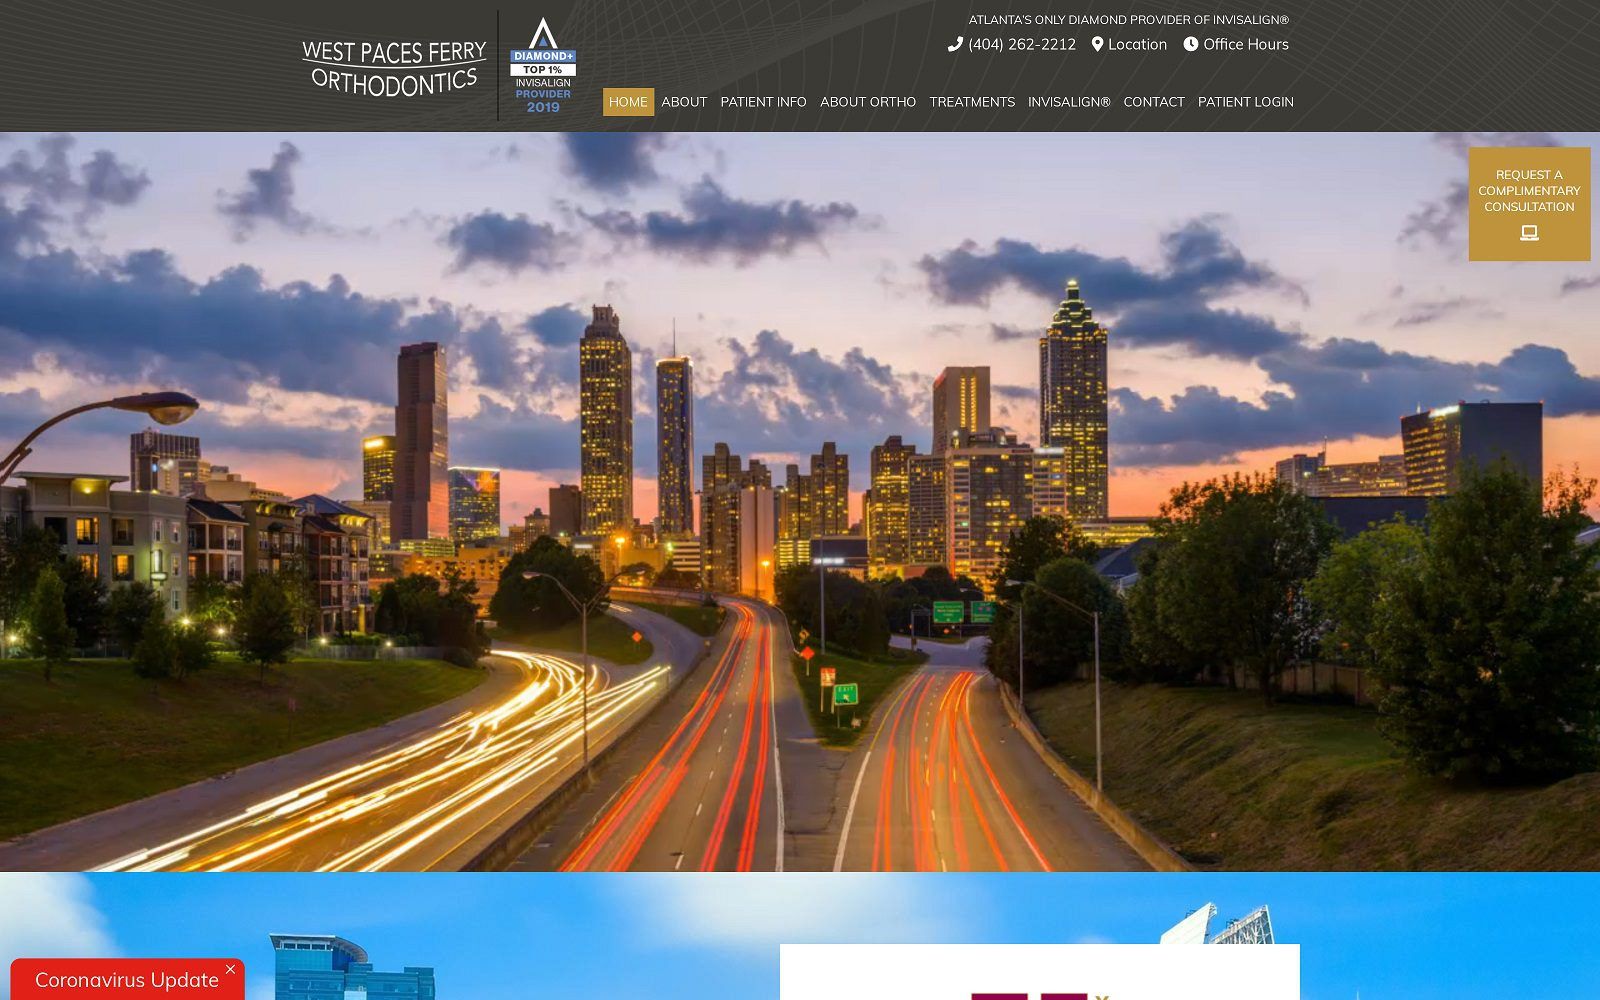 The screenshot of west paces ferry orthodontics website